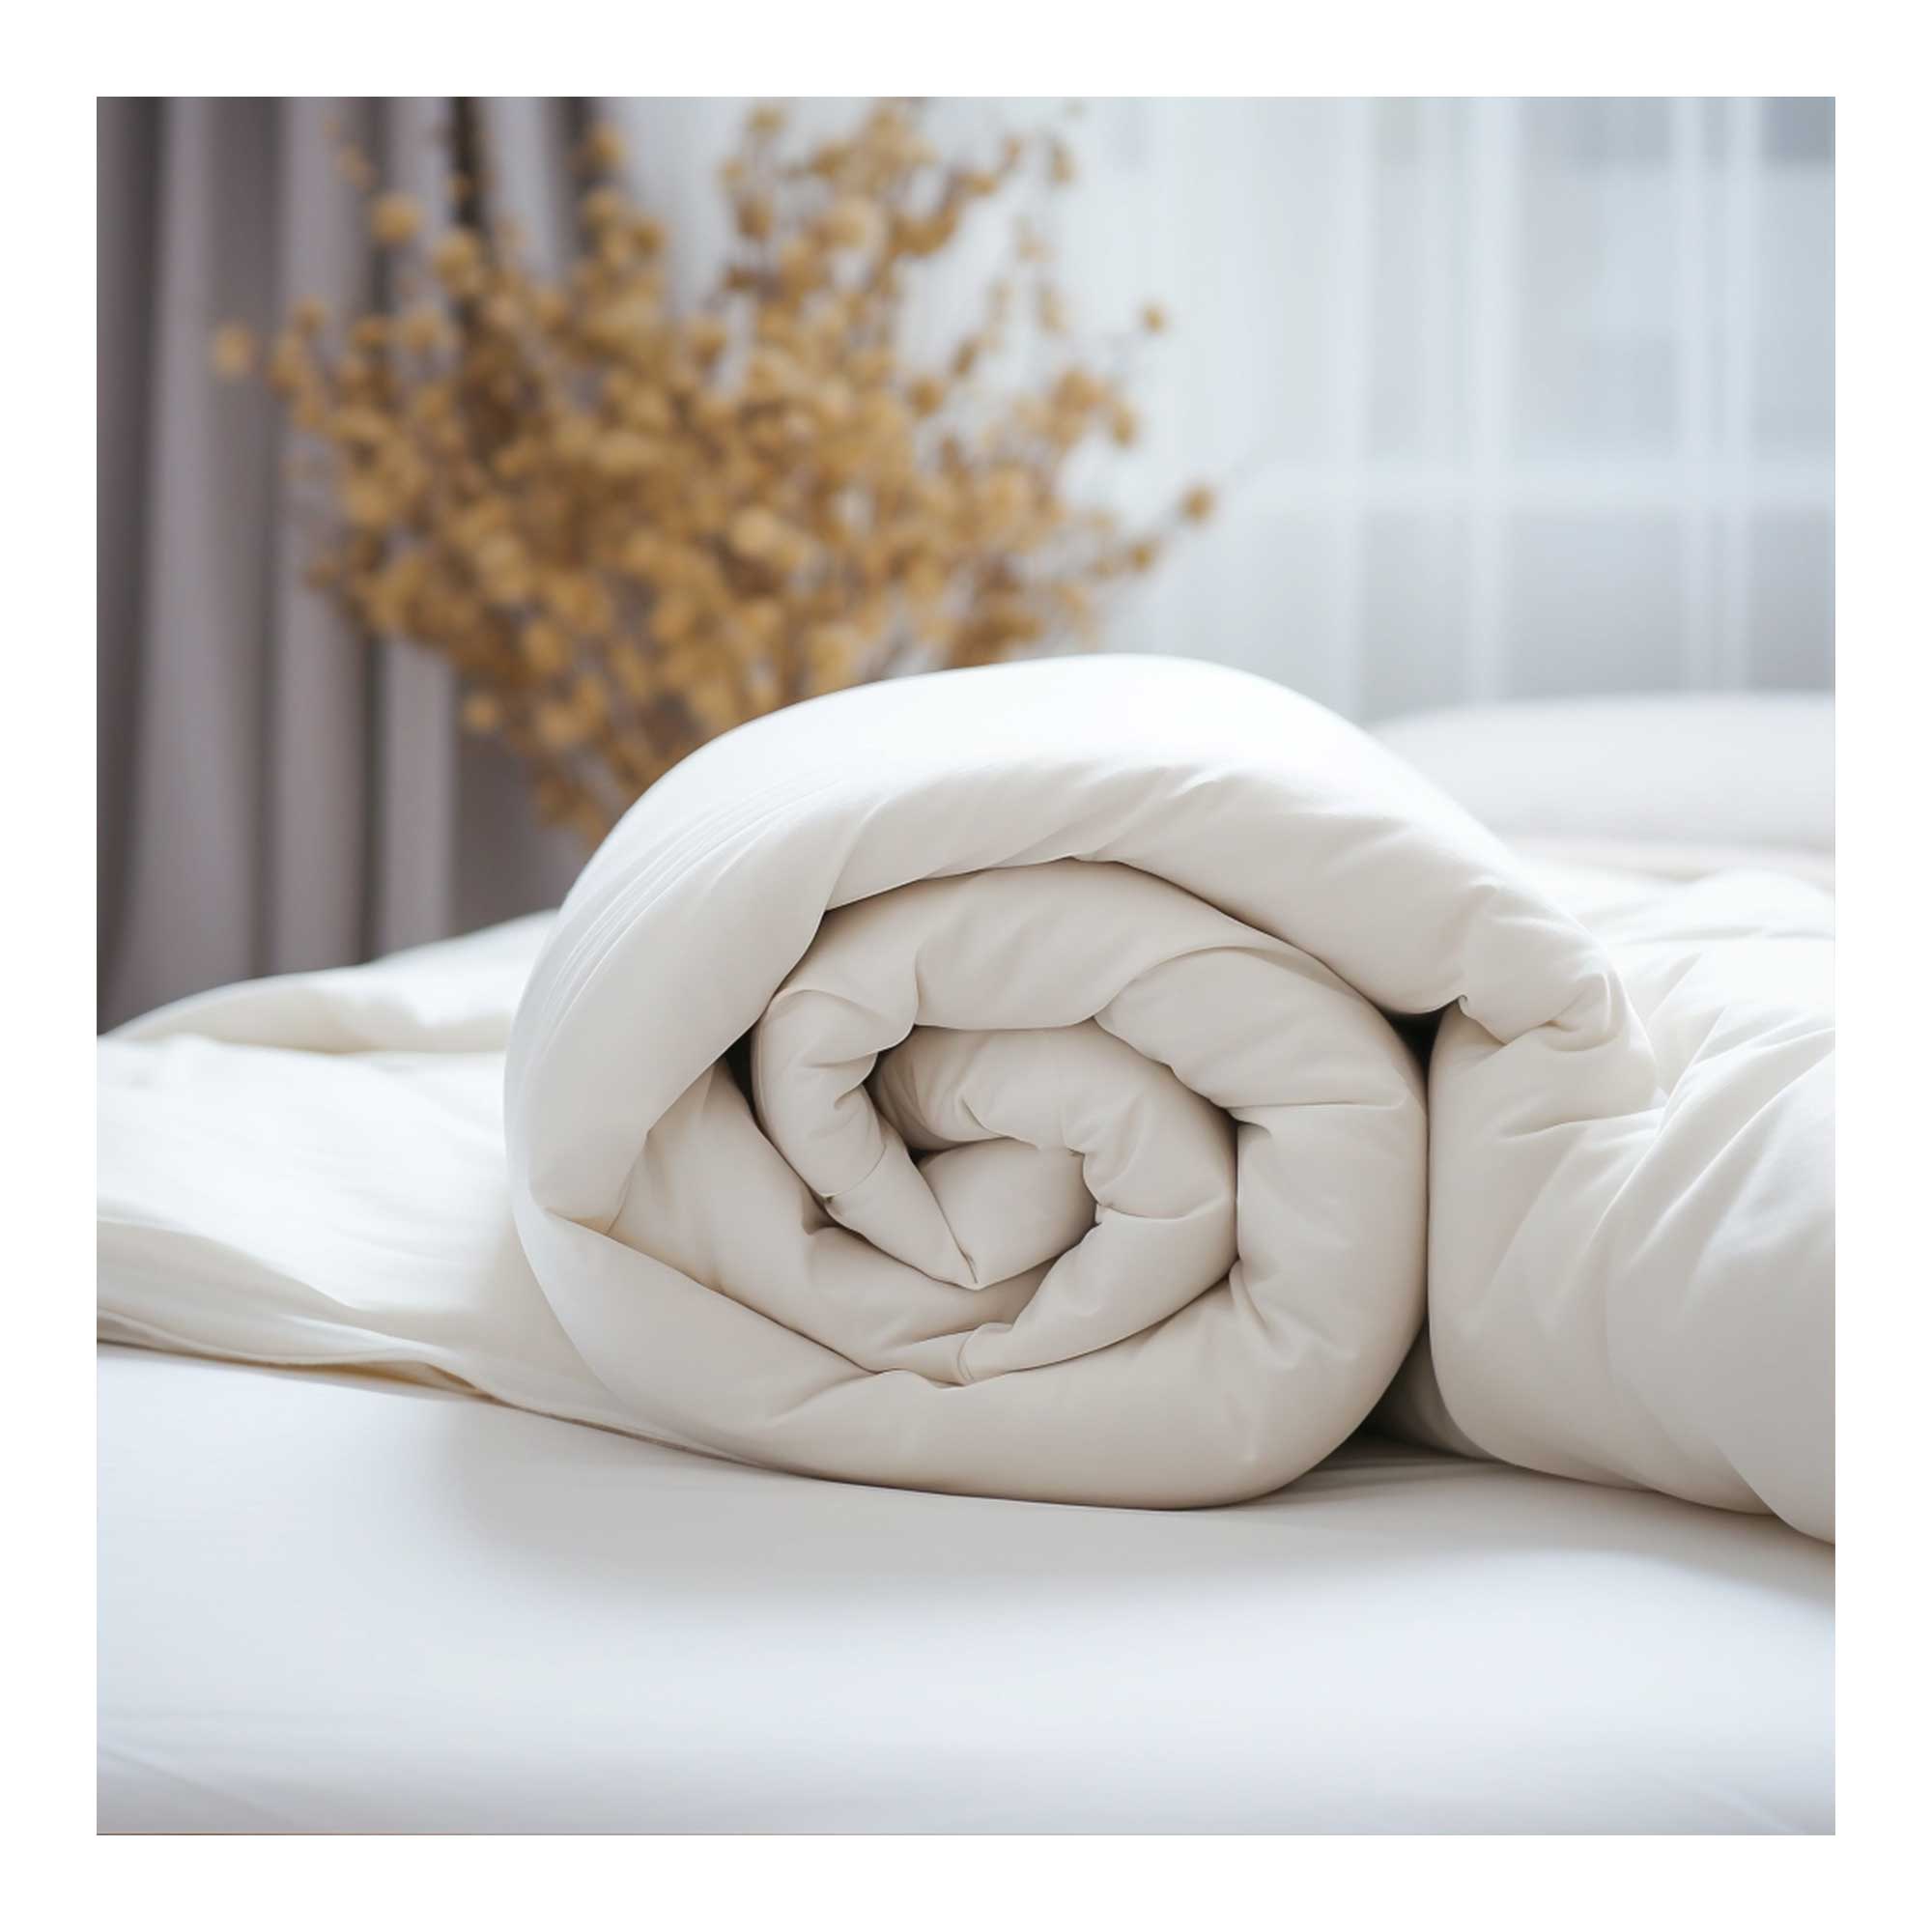 Devon Closewool wool duvet placed on a rustic wooden bench, emphasizing its natural origins.